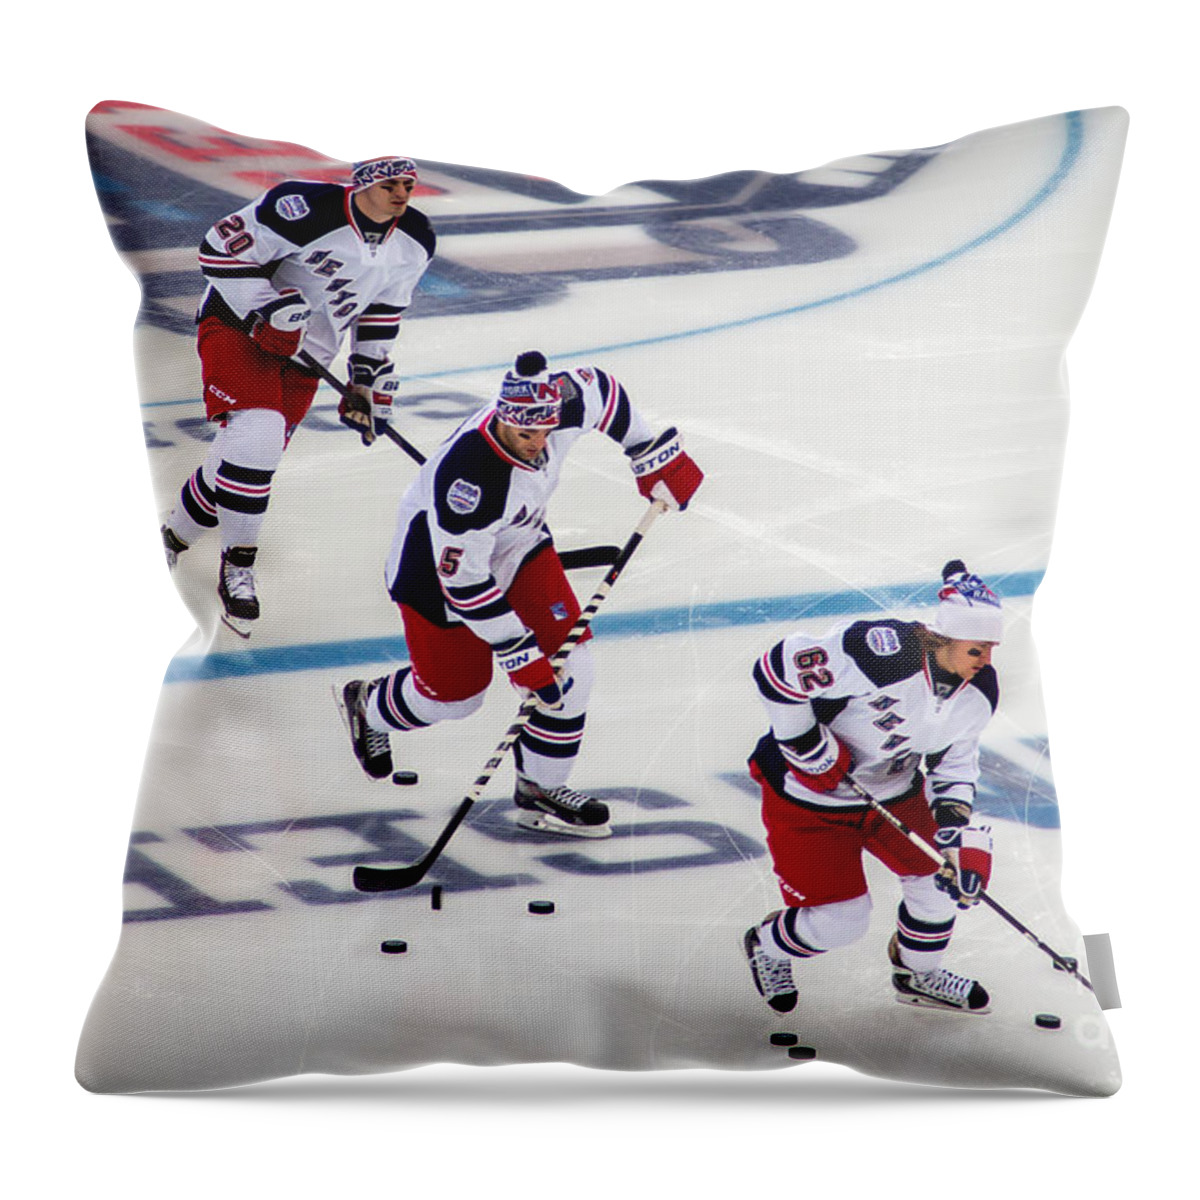 Faceoff Throw Pillow featuring the photograph Warming Up by David Rucker